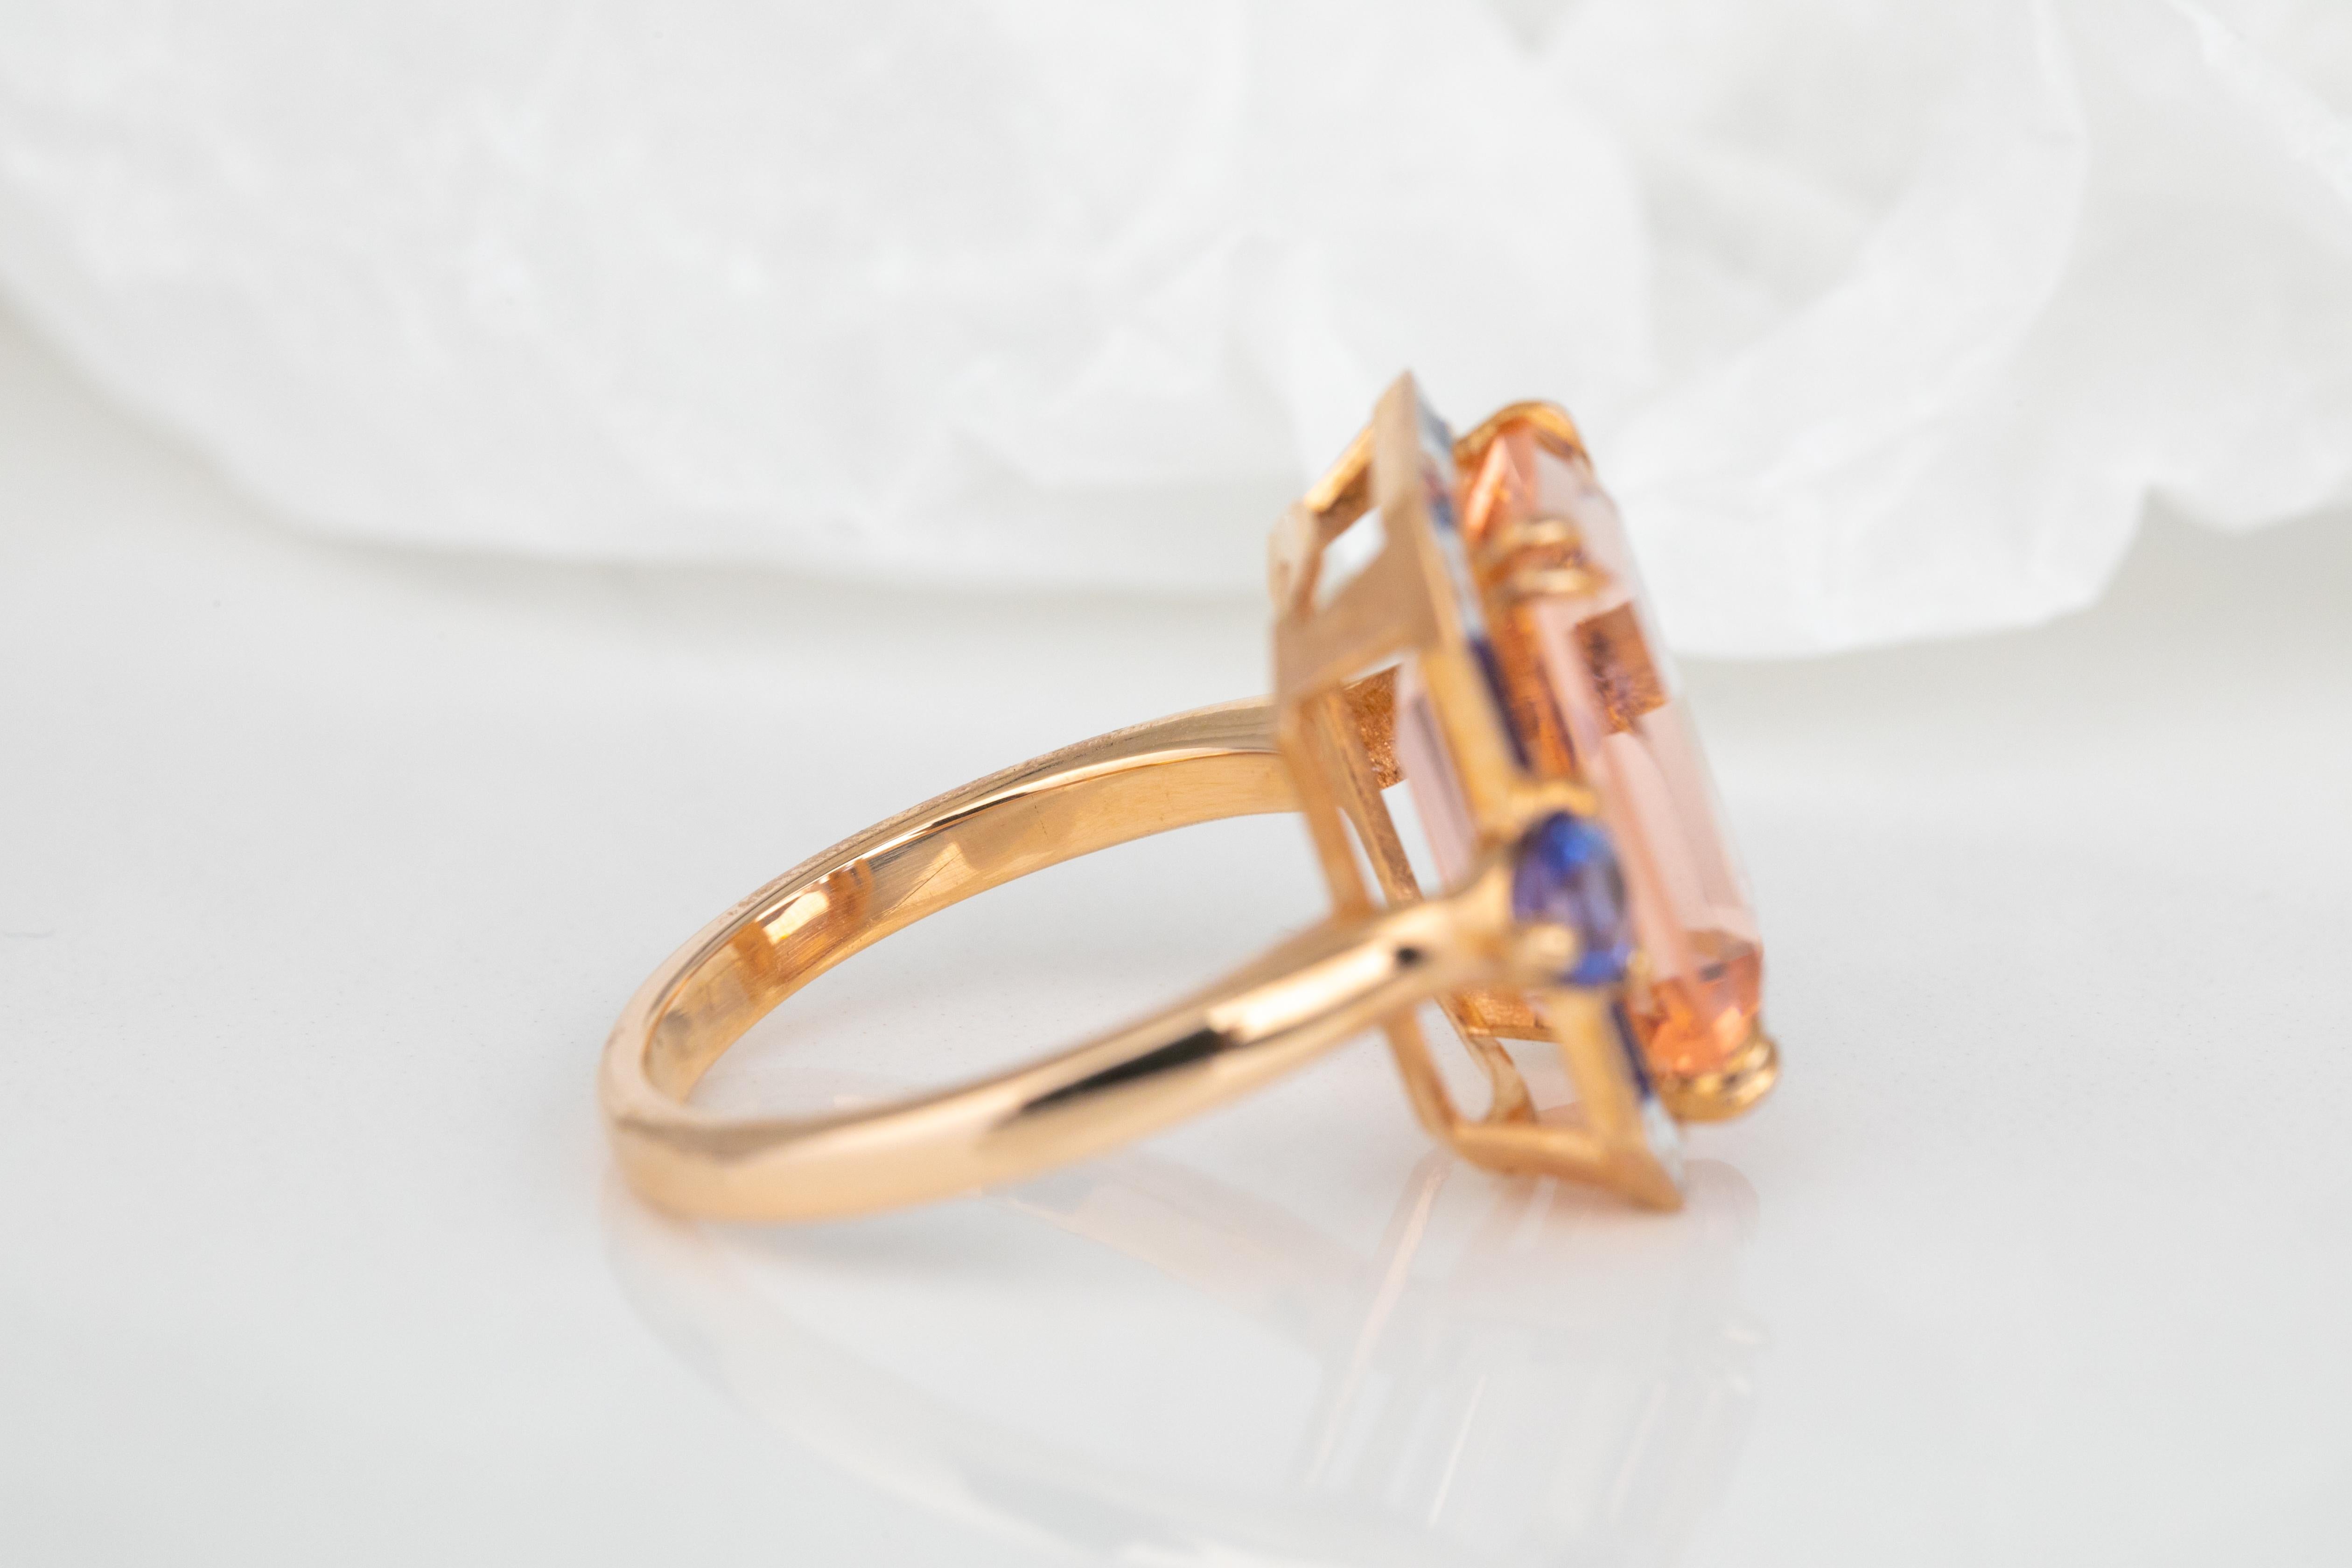 For Sale:  Art Deco Style 14k Solid Gold, Pink Quartz and Ceylon Sapphire Stone Ring 3